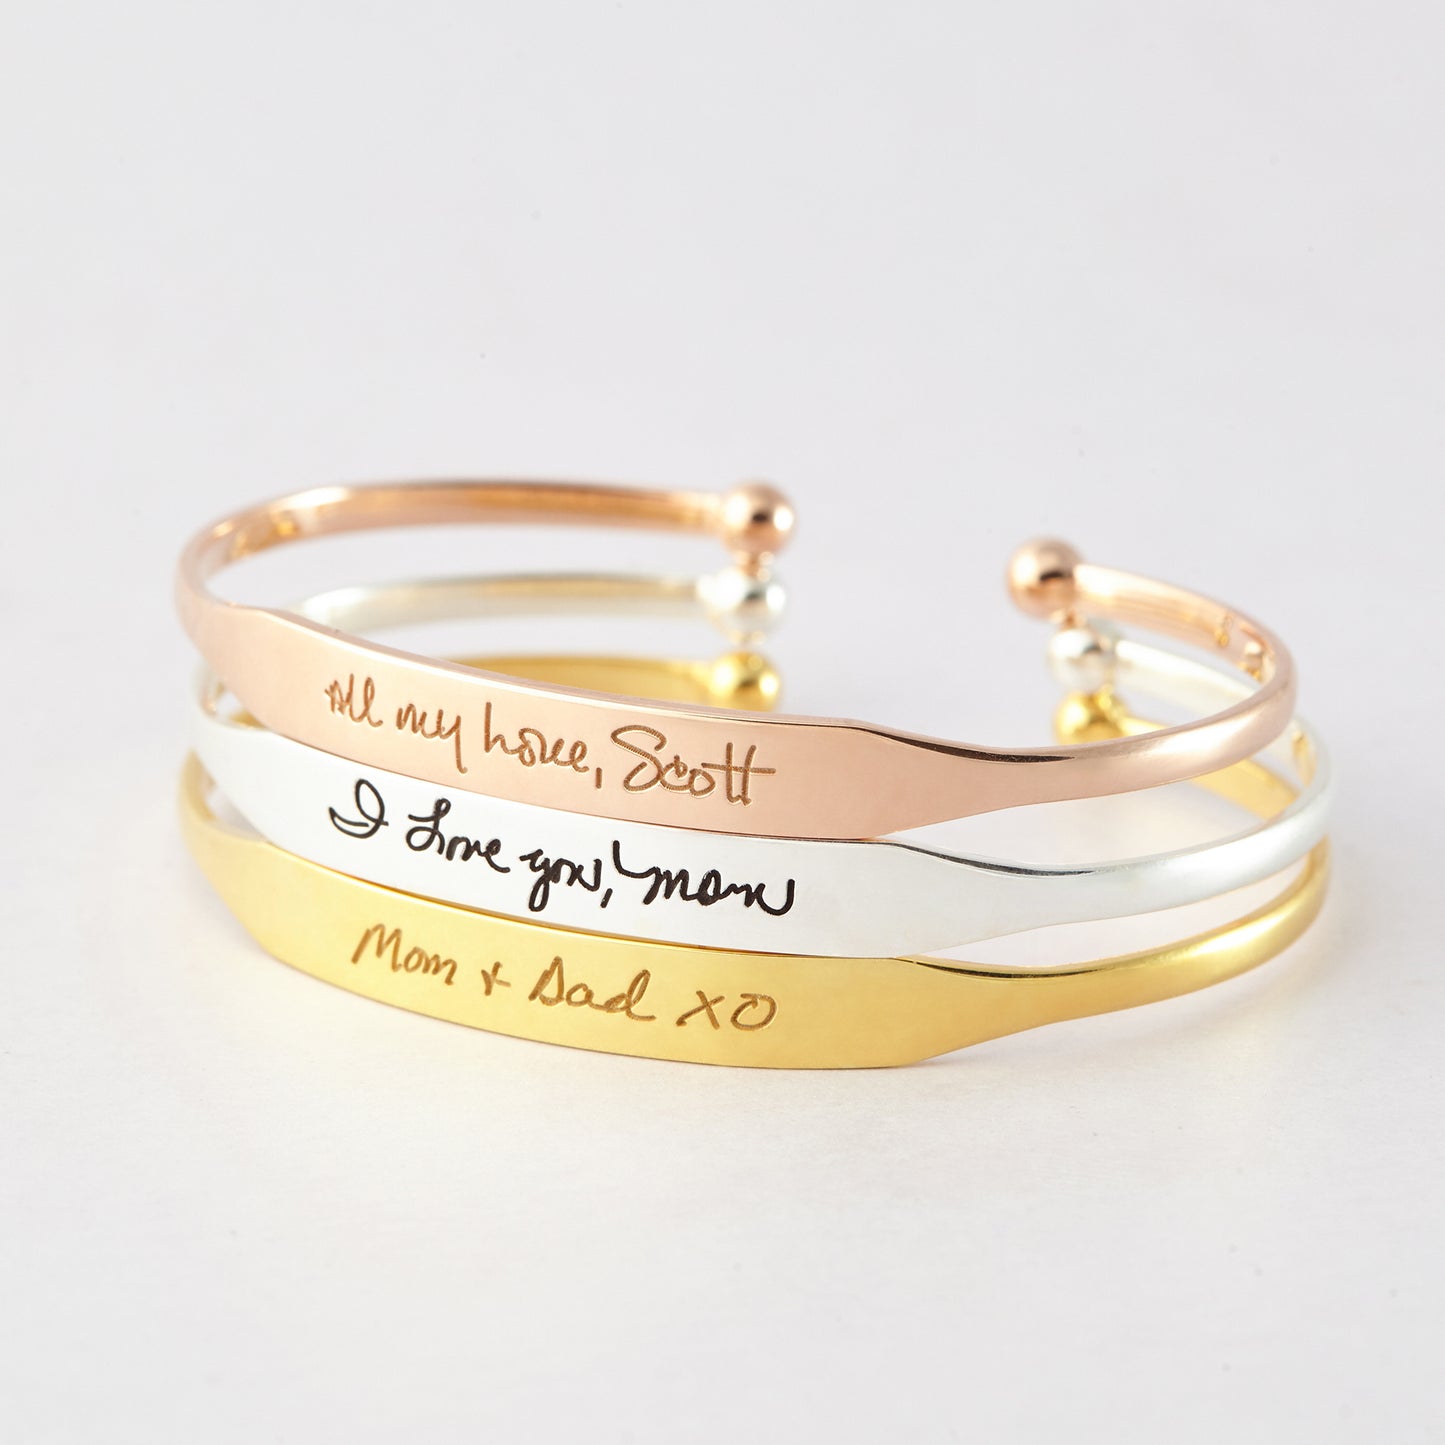 Handwritten Bracelet Memorial Handwriting Jewelry, Adult, Female, in Colors Gold, Rose Gold, or Silver